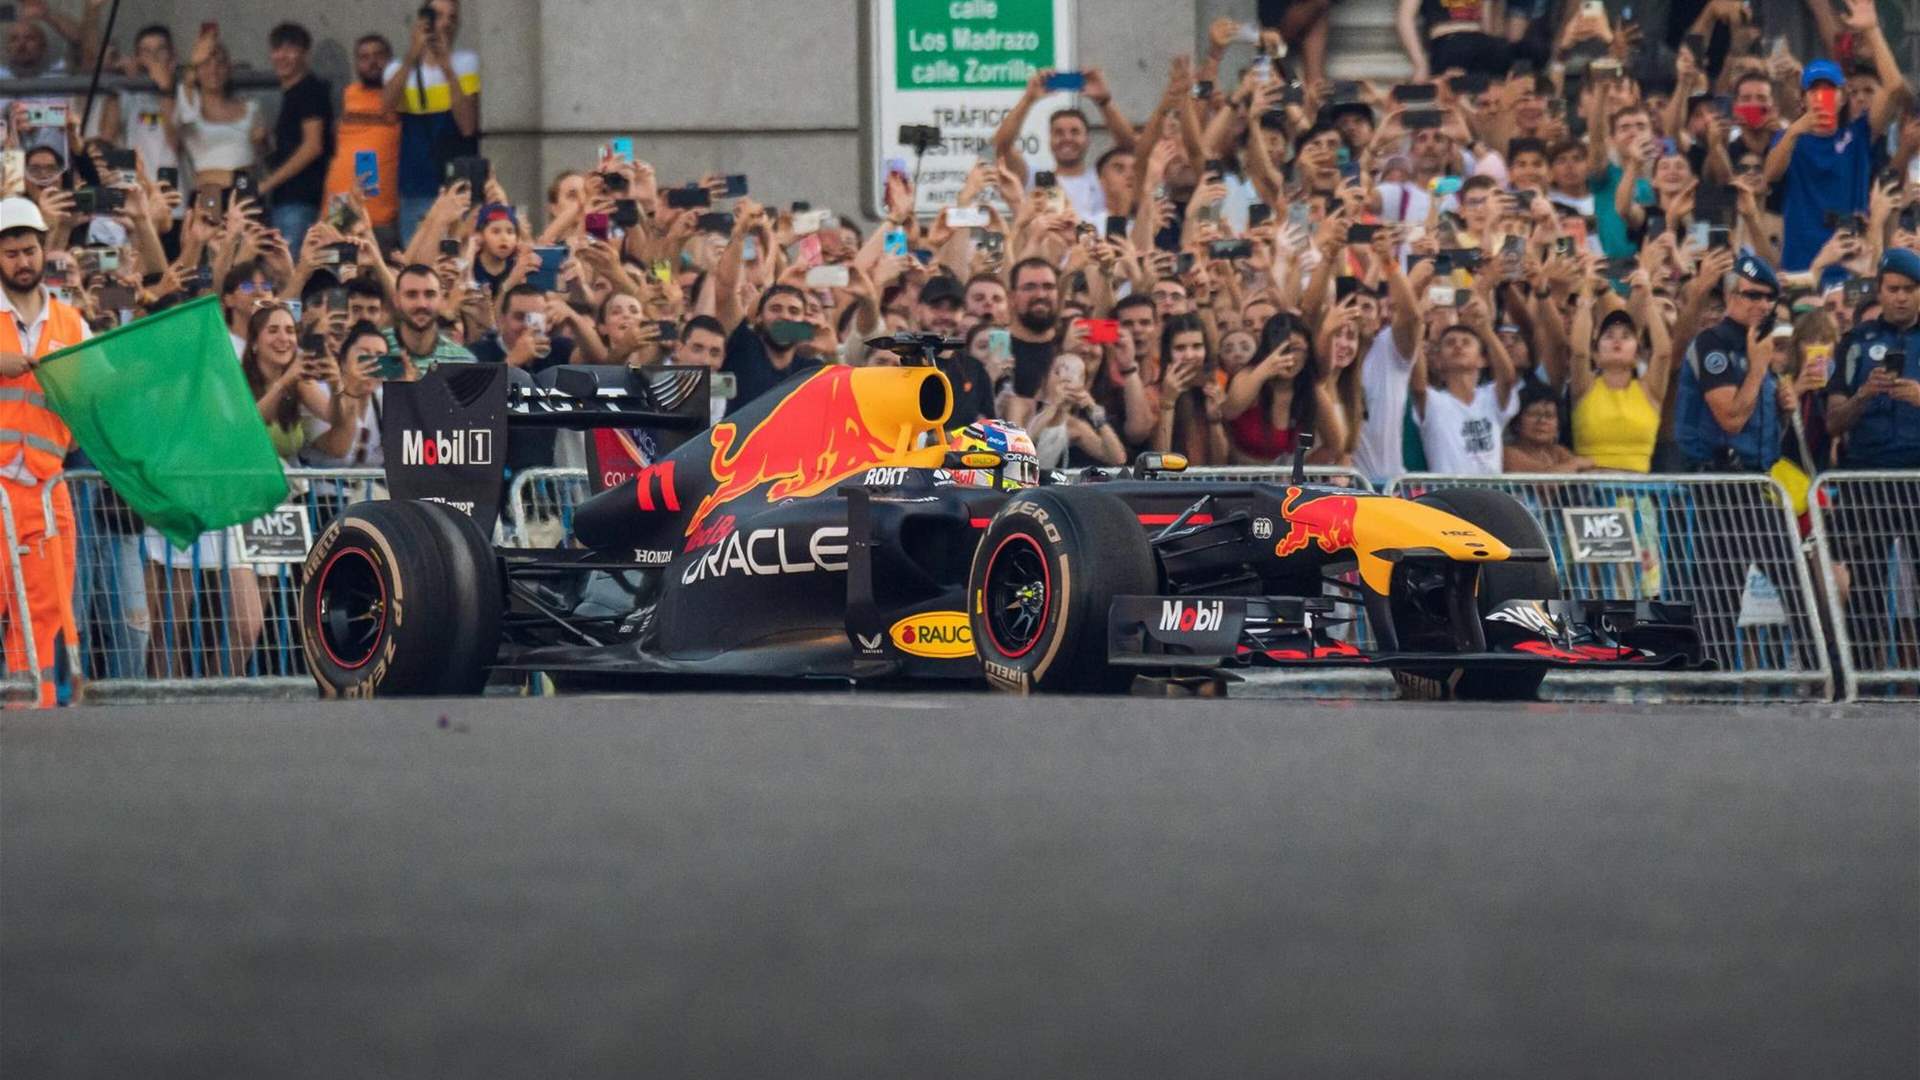 Formula 1 unveils plans for Spanish Grand Prix in Madrid from 2026 to 2035